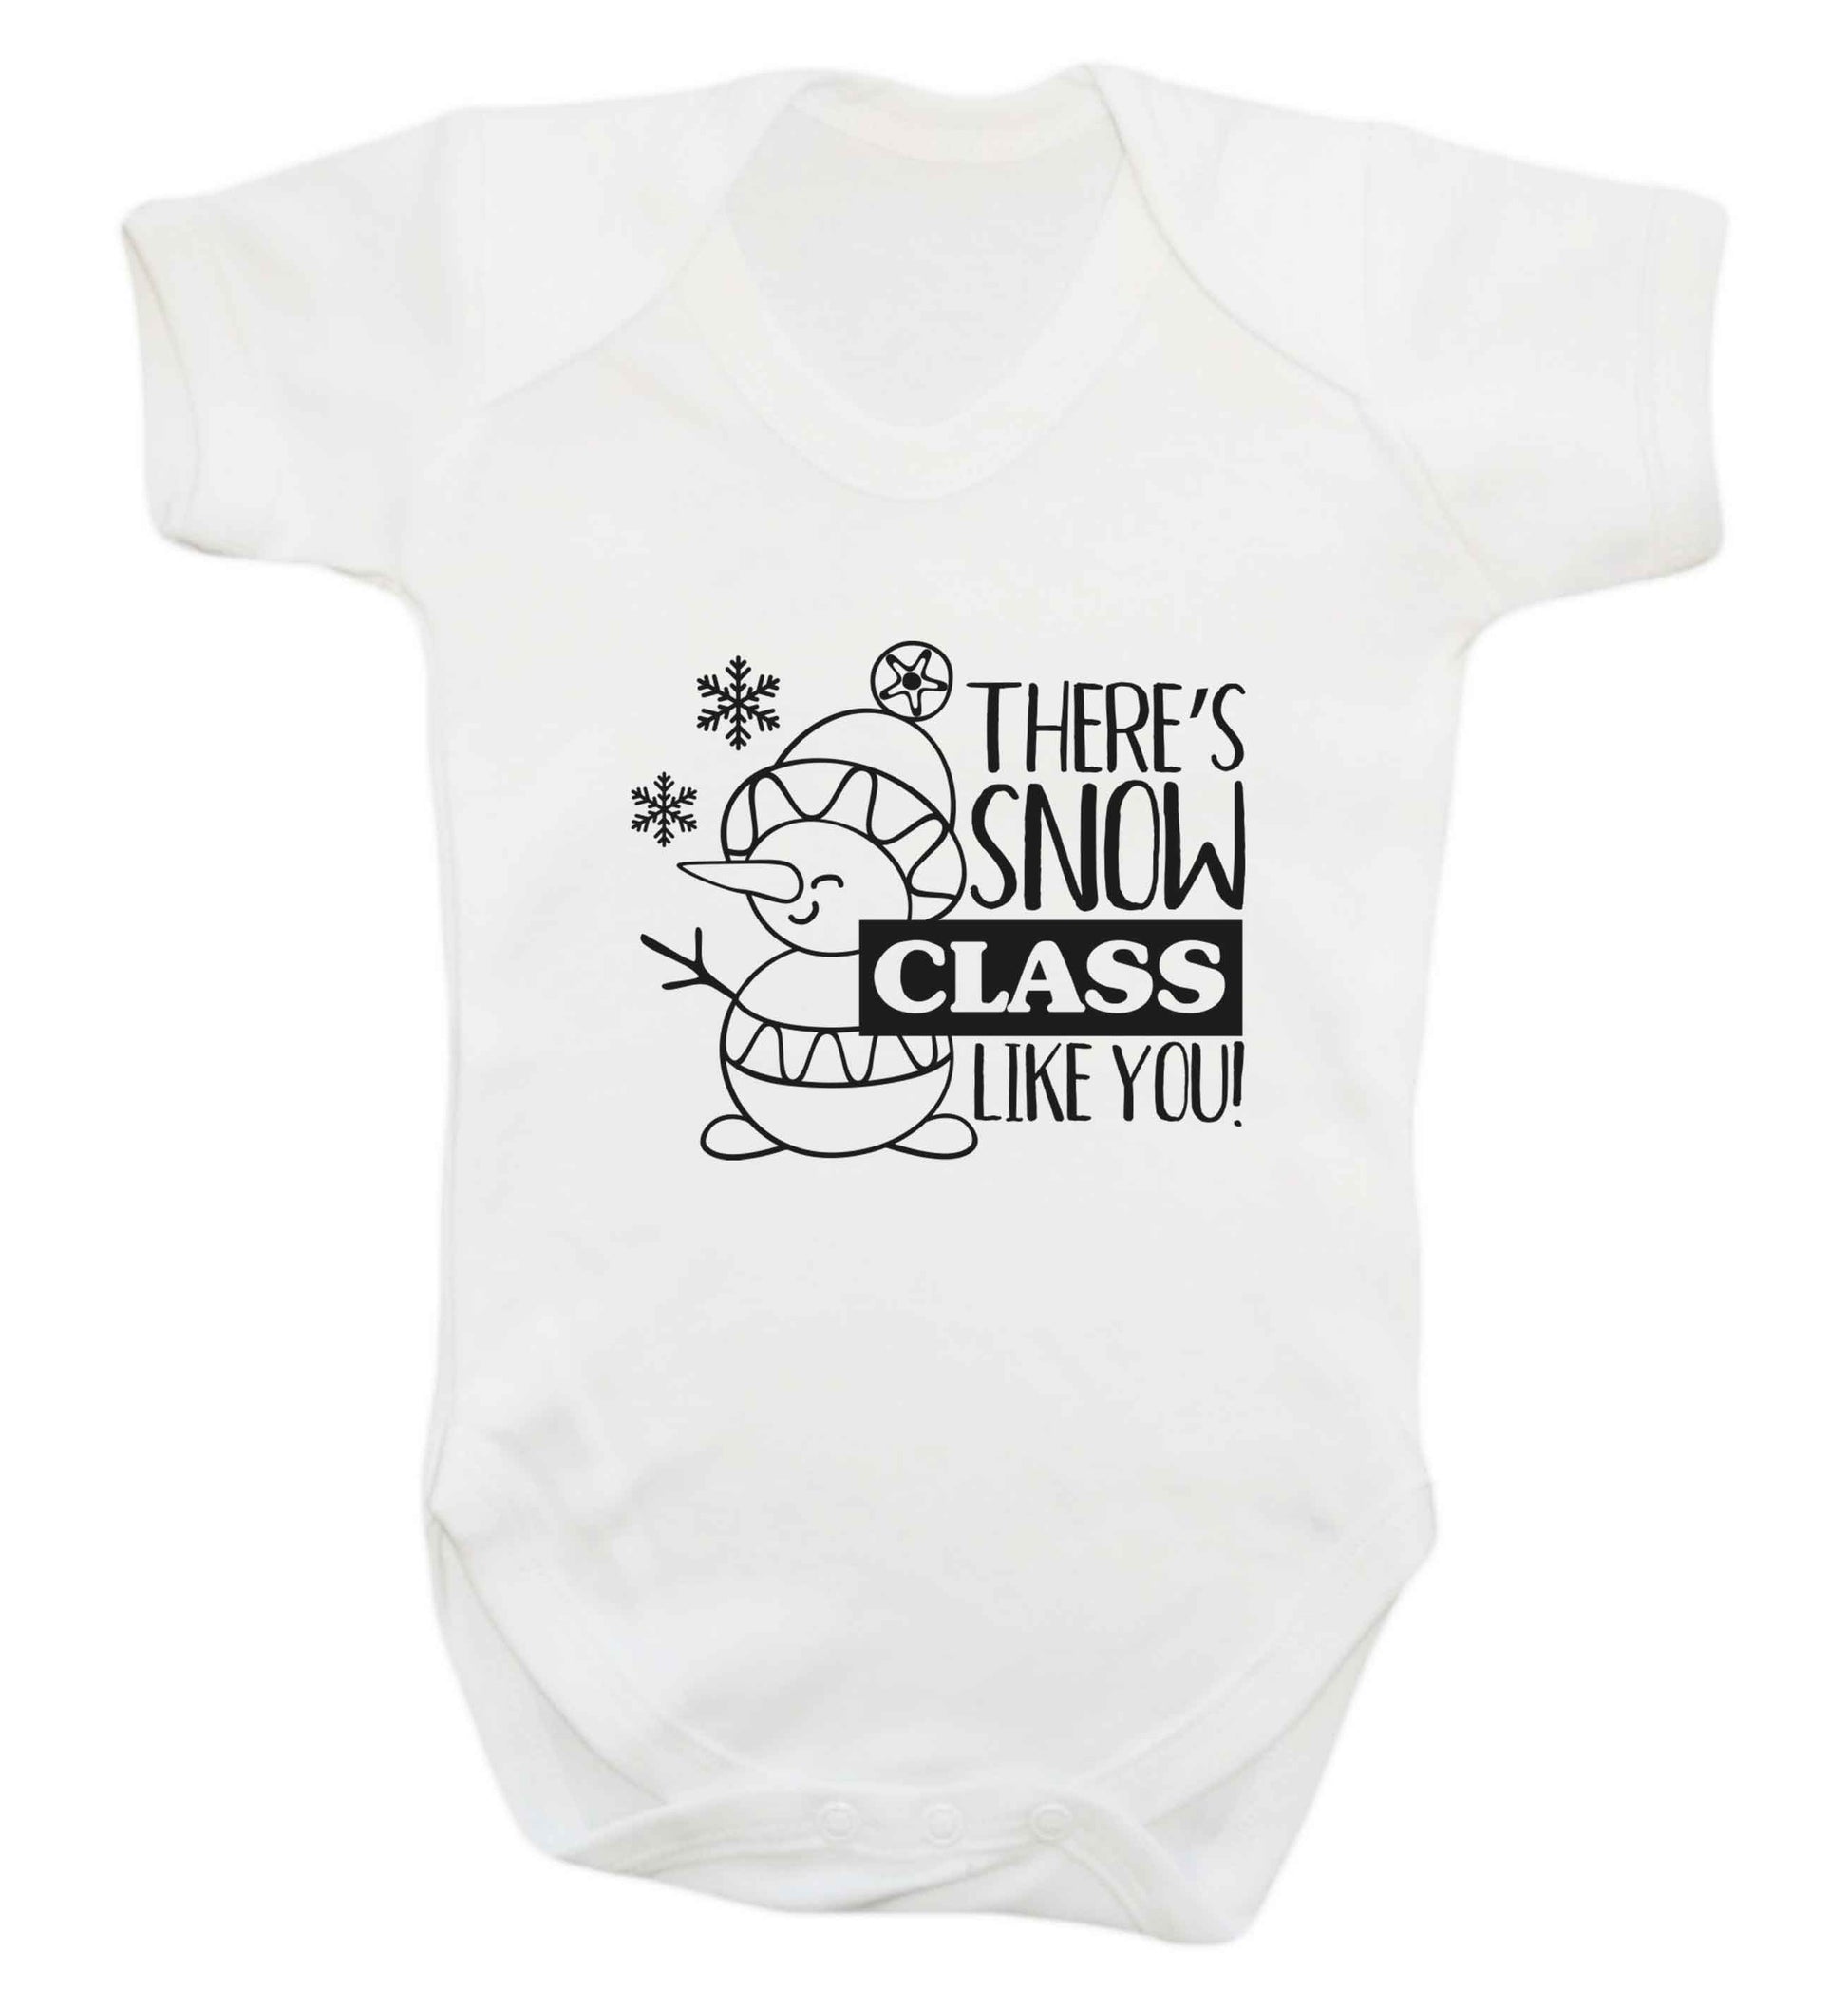 There's snow class like you baby vest white 18-24 months